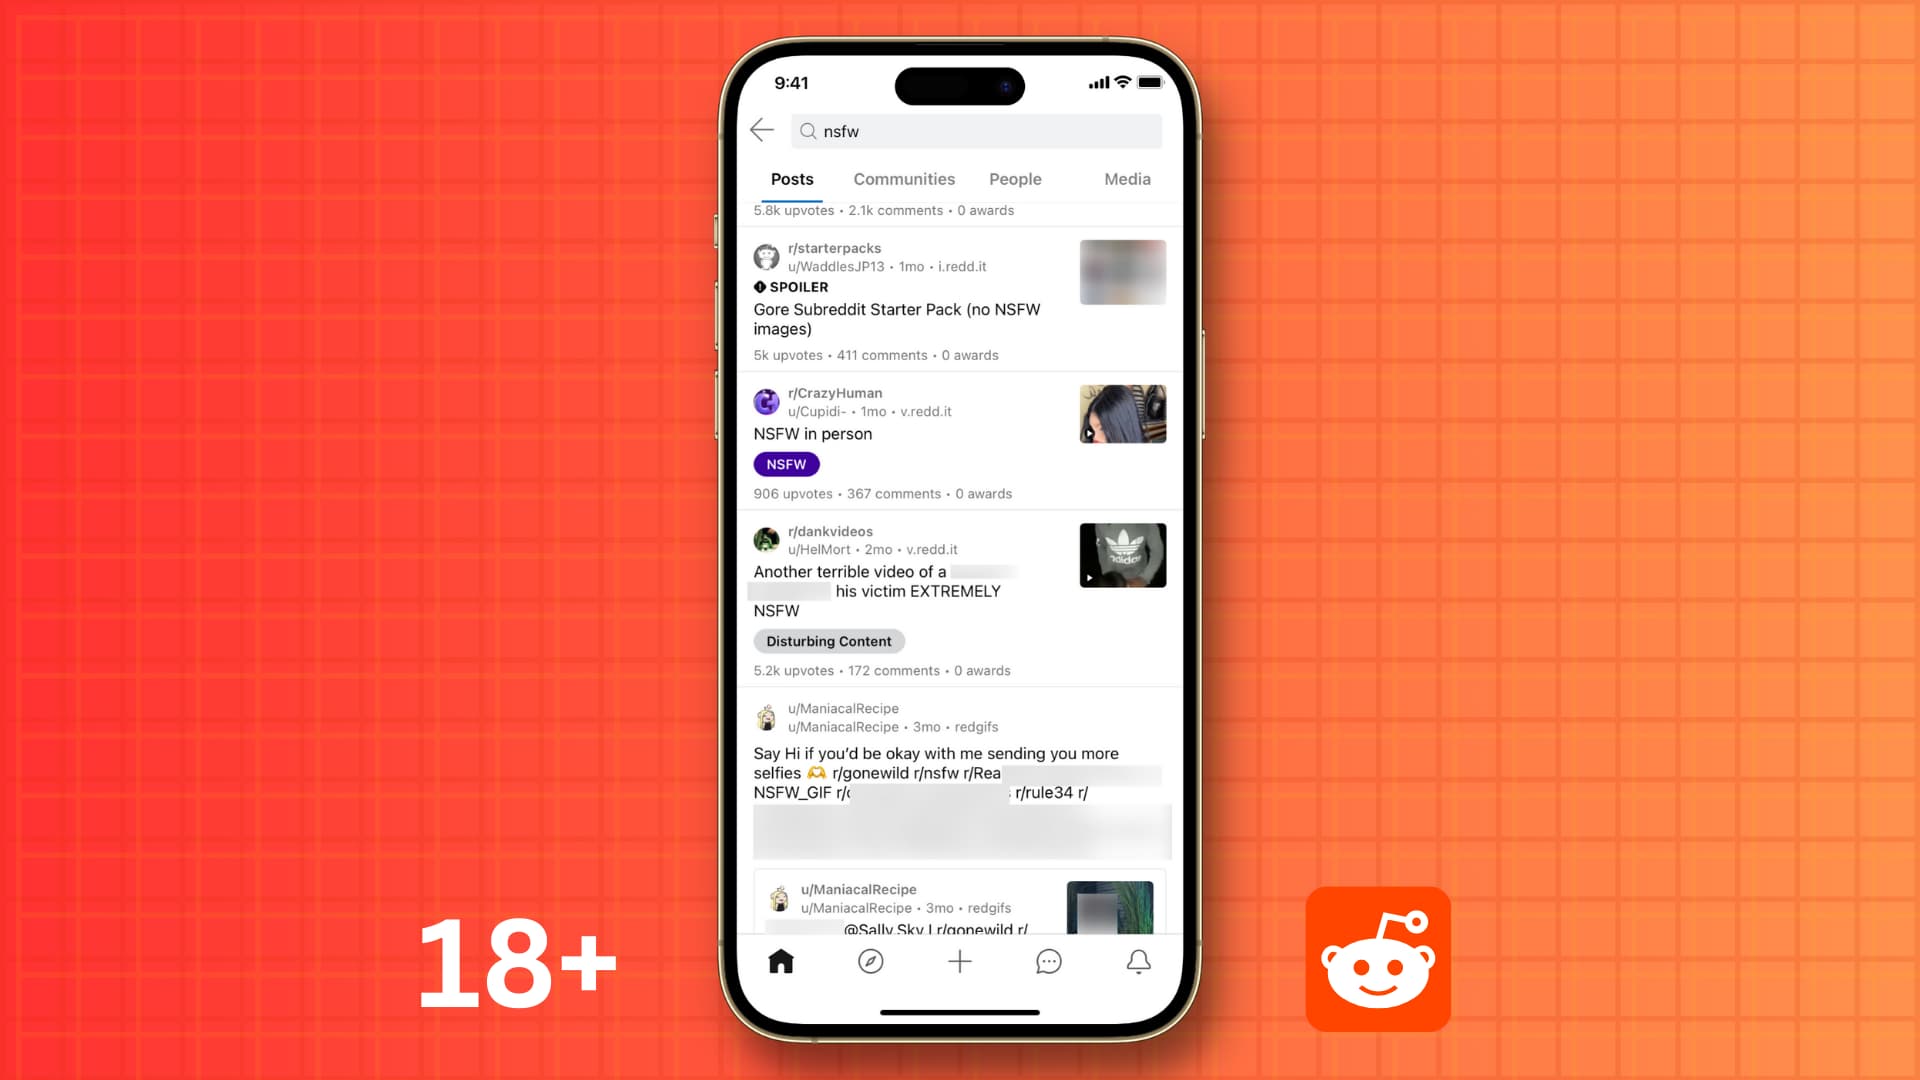 How to see NSFW content and stop image blur on Reddit for iPhone, Android, and web